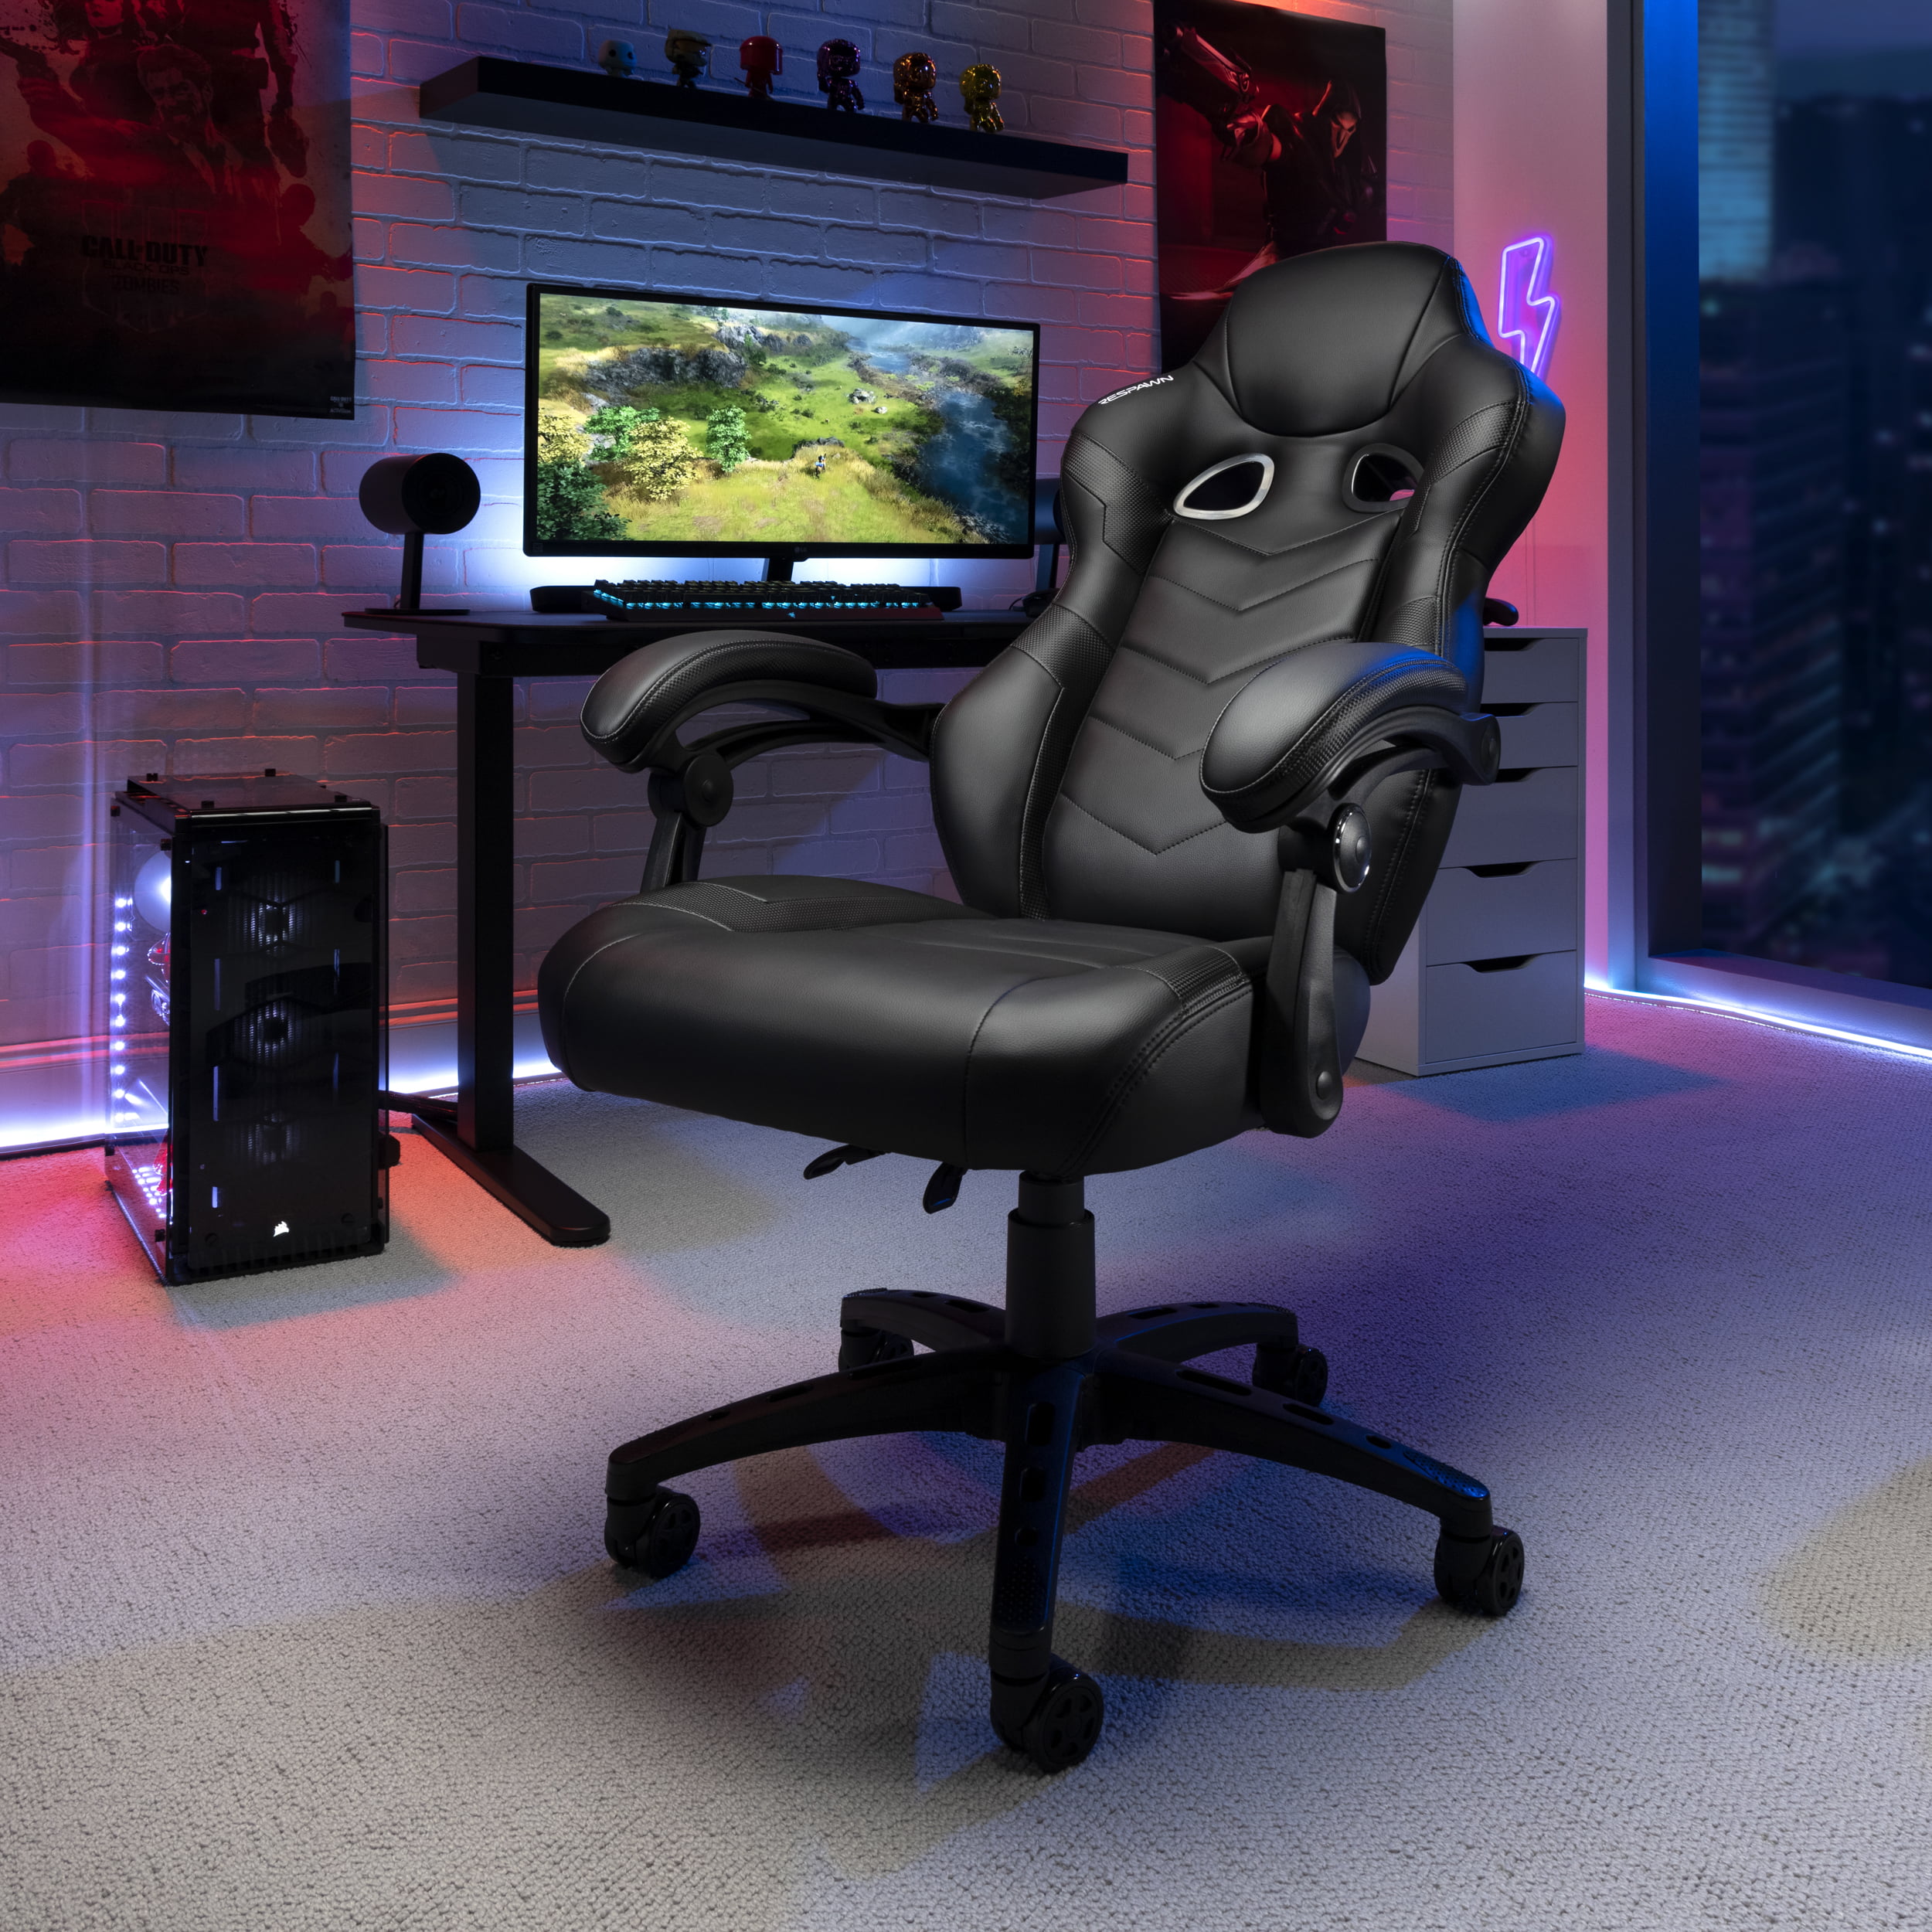 TRITON p050-f1-by Gaming Chair 